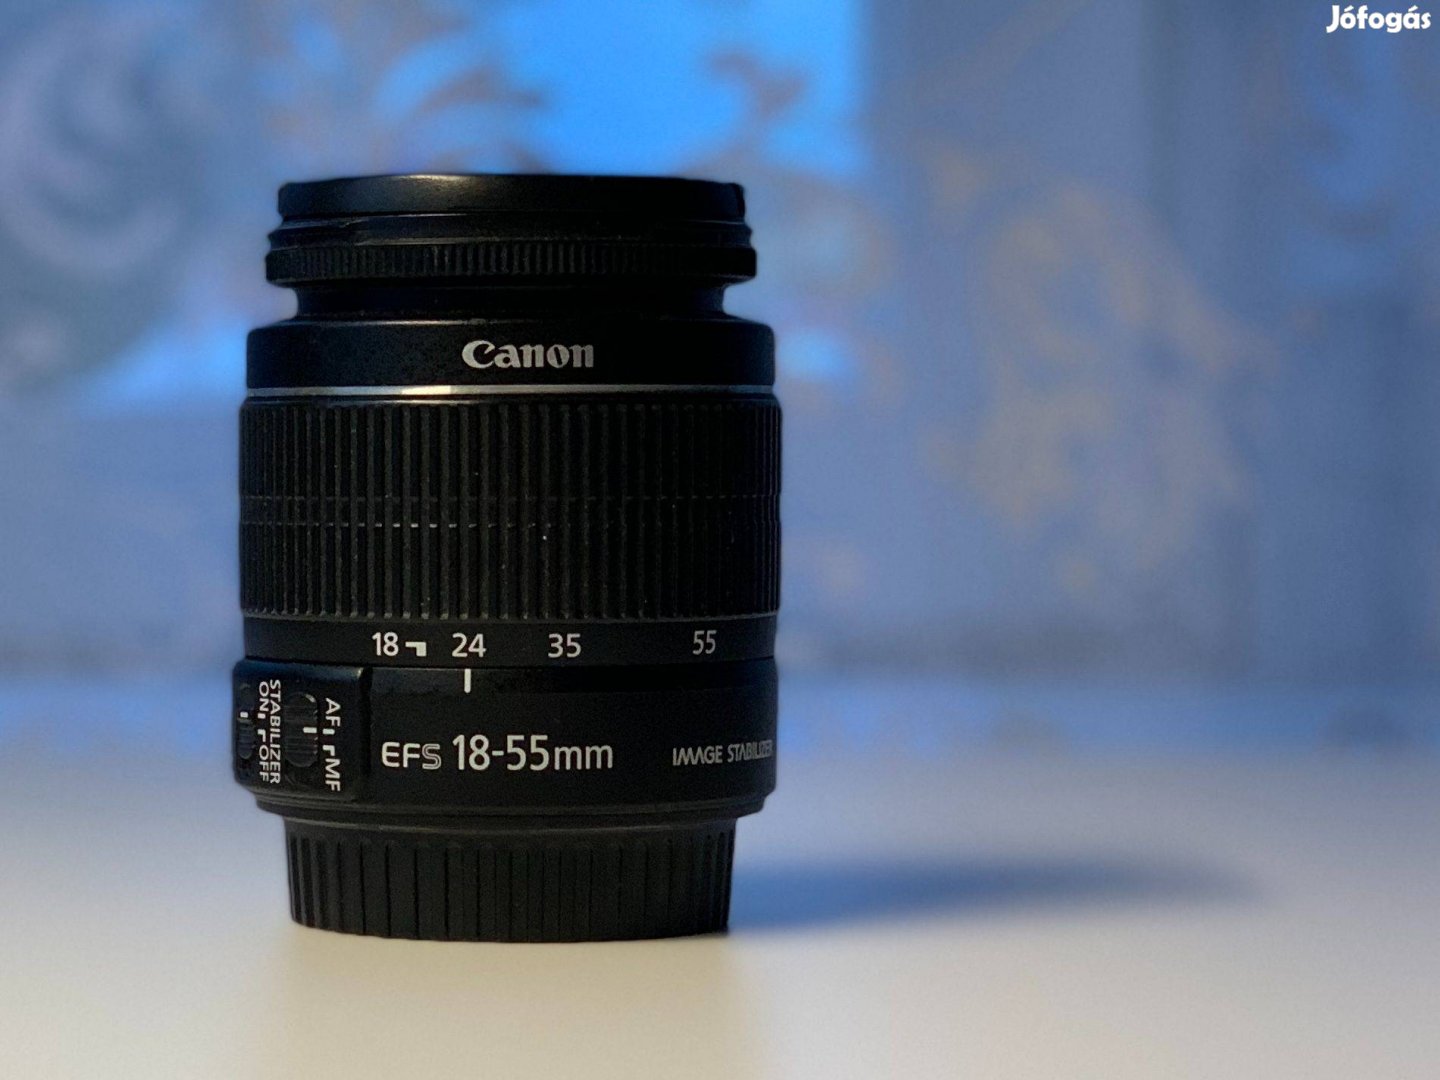 Canon EFS 18-55mm